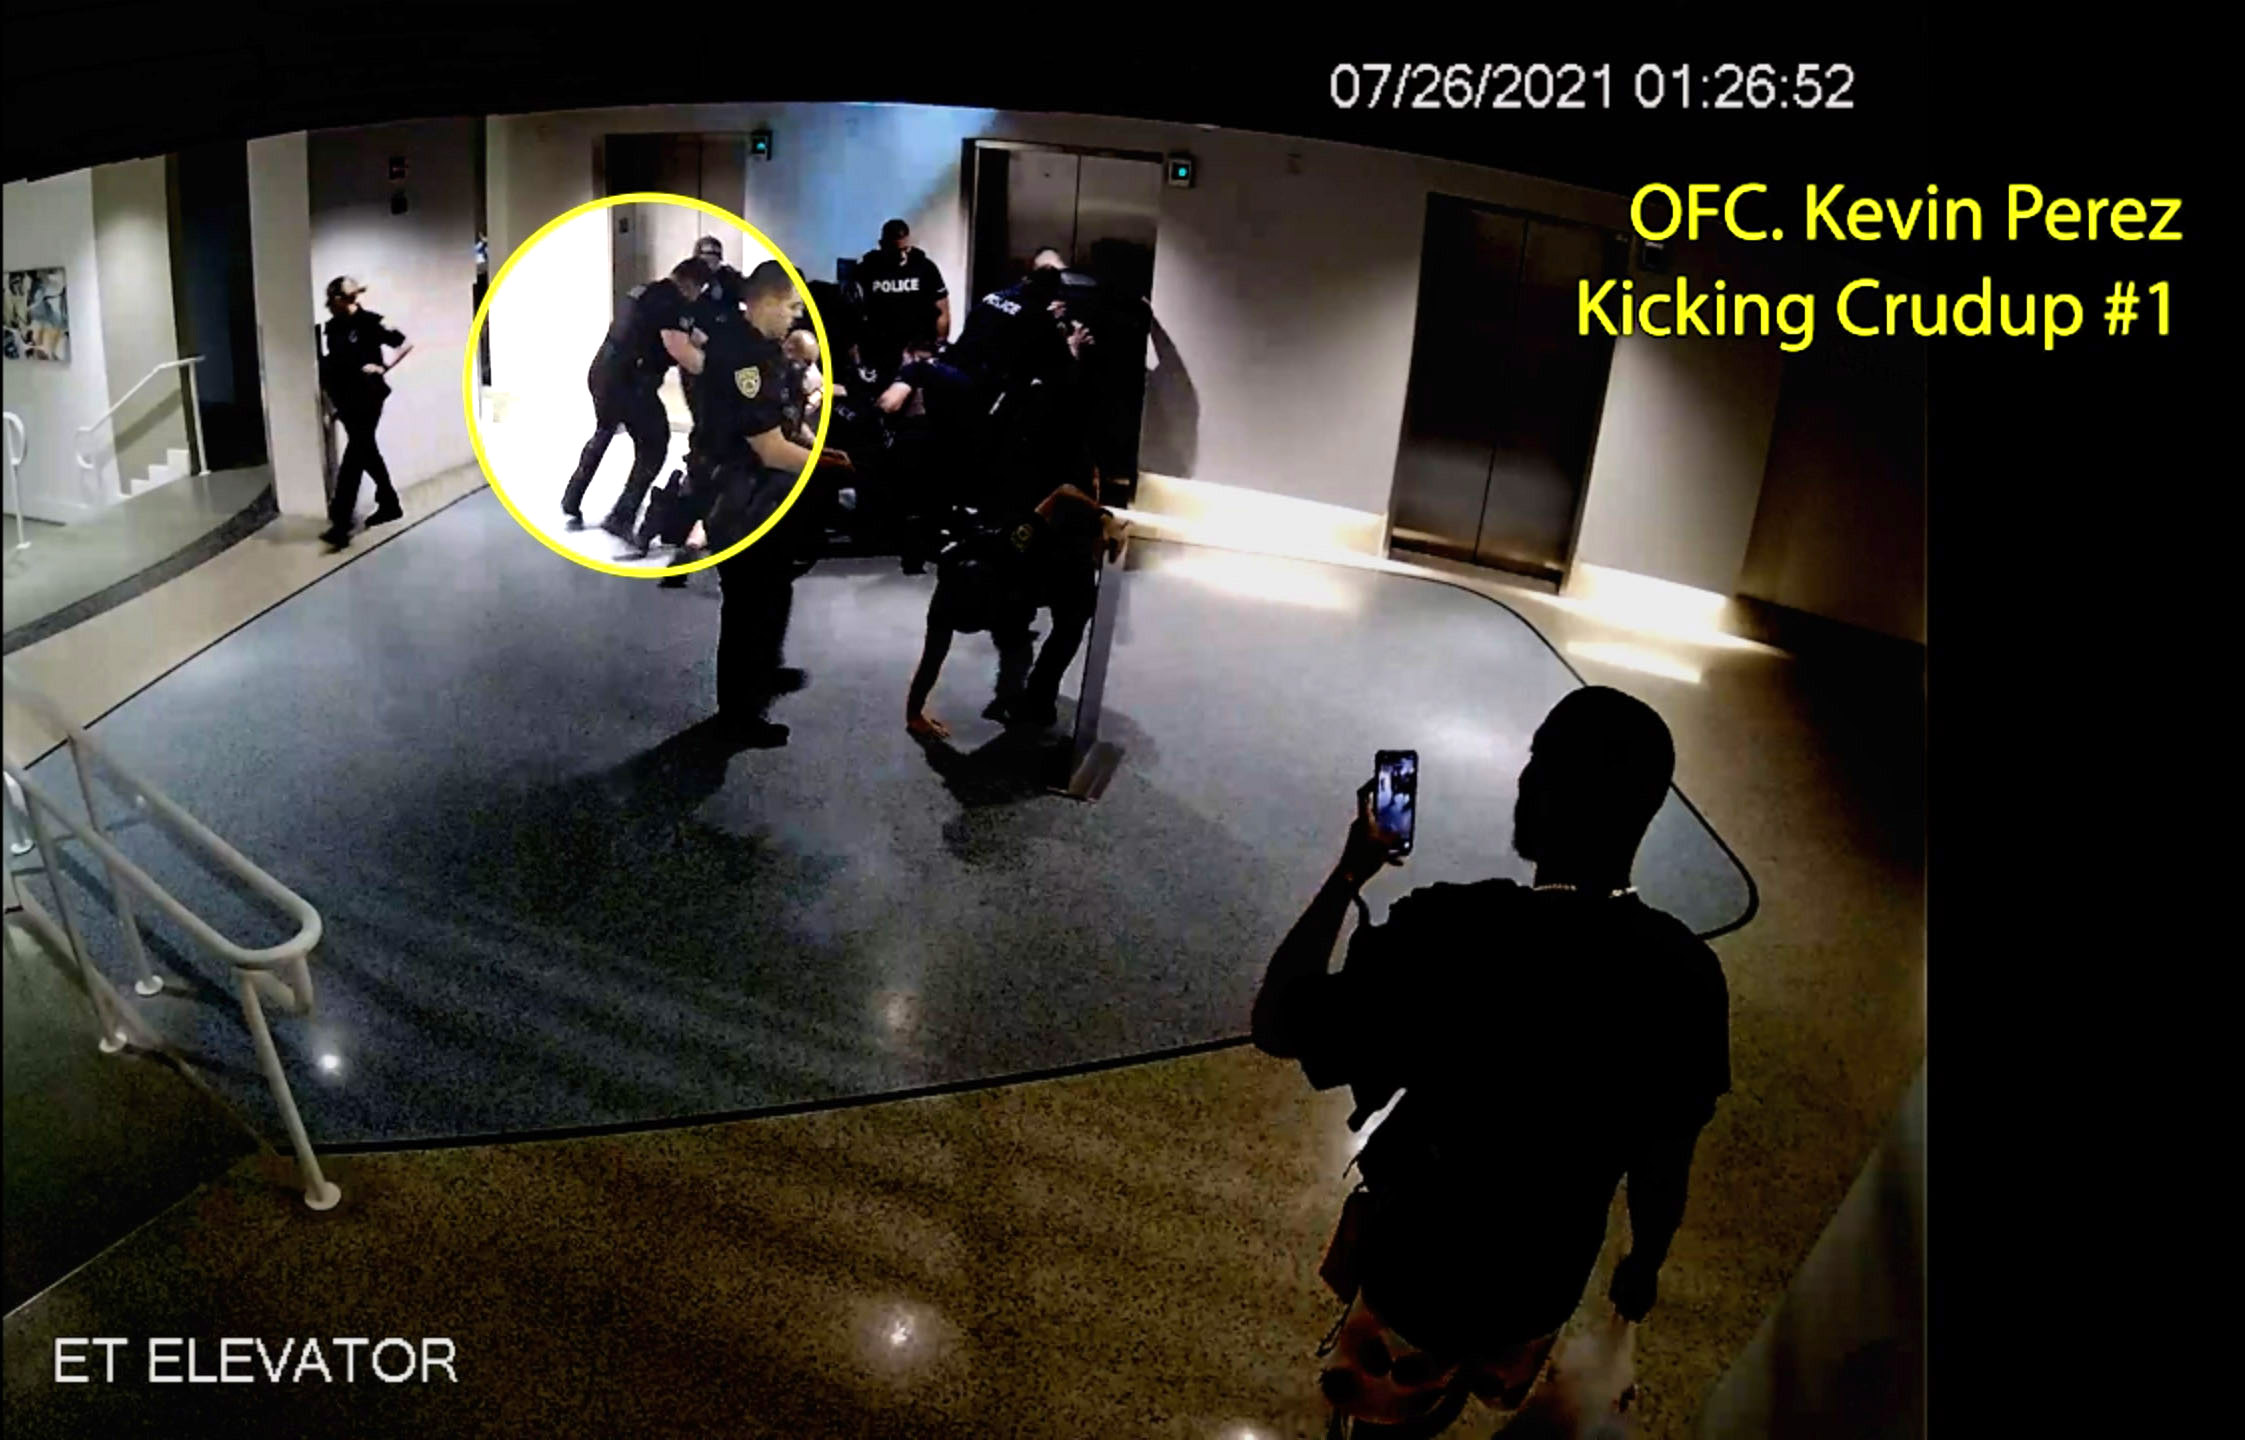 PHOTO: Officer Kevin Perez is seen as he motions to kick Dalonta Crudup while Khalid Vaughn stands on the far right recording video with his phone, in an image taken from hotel surveillance video released by the Miami-Dade State Attorney’s Office.